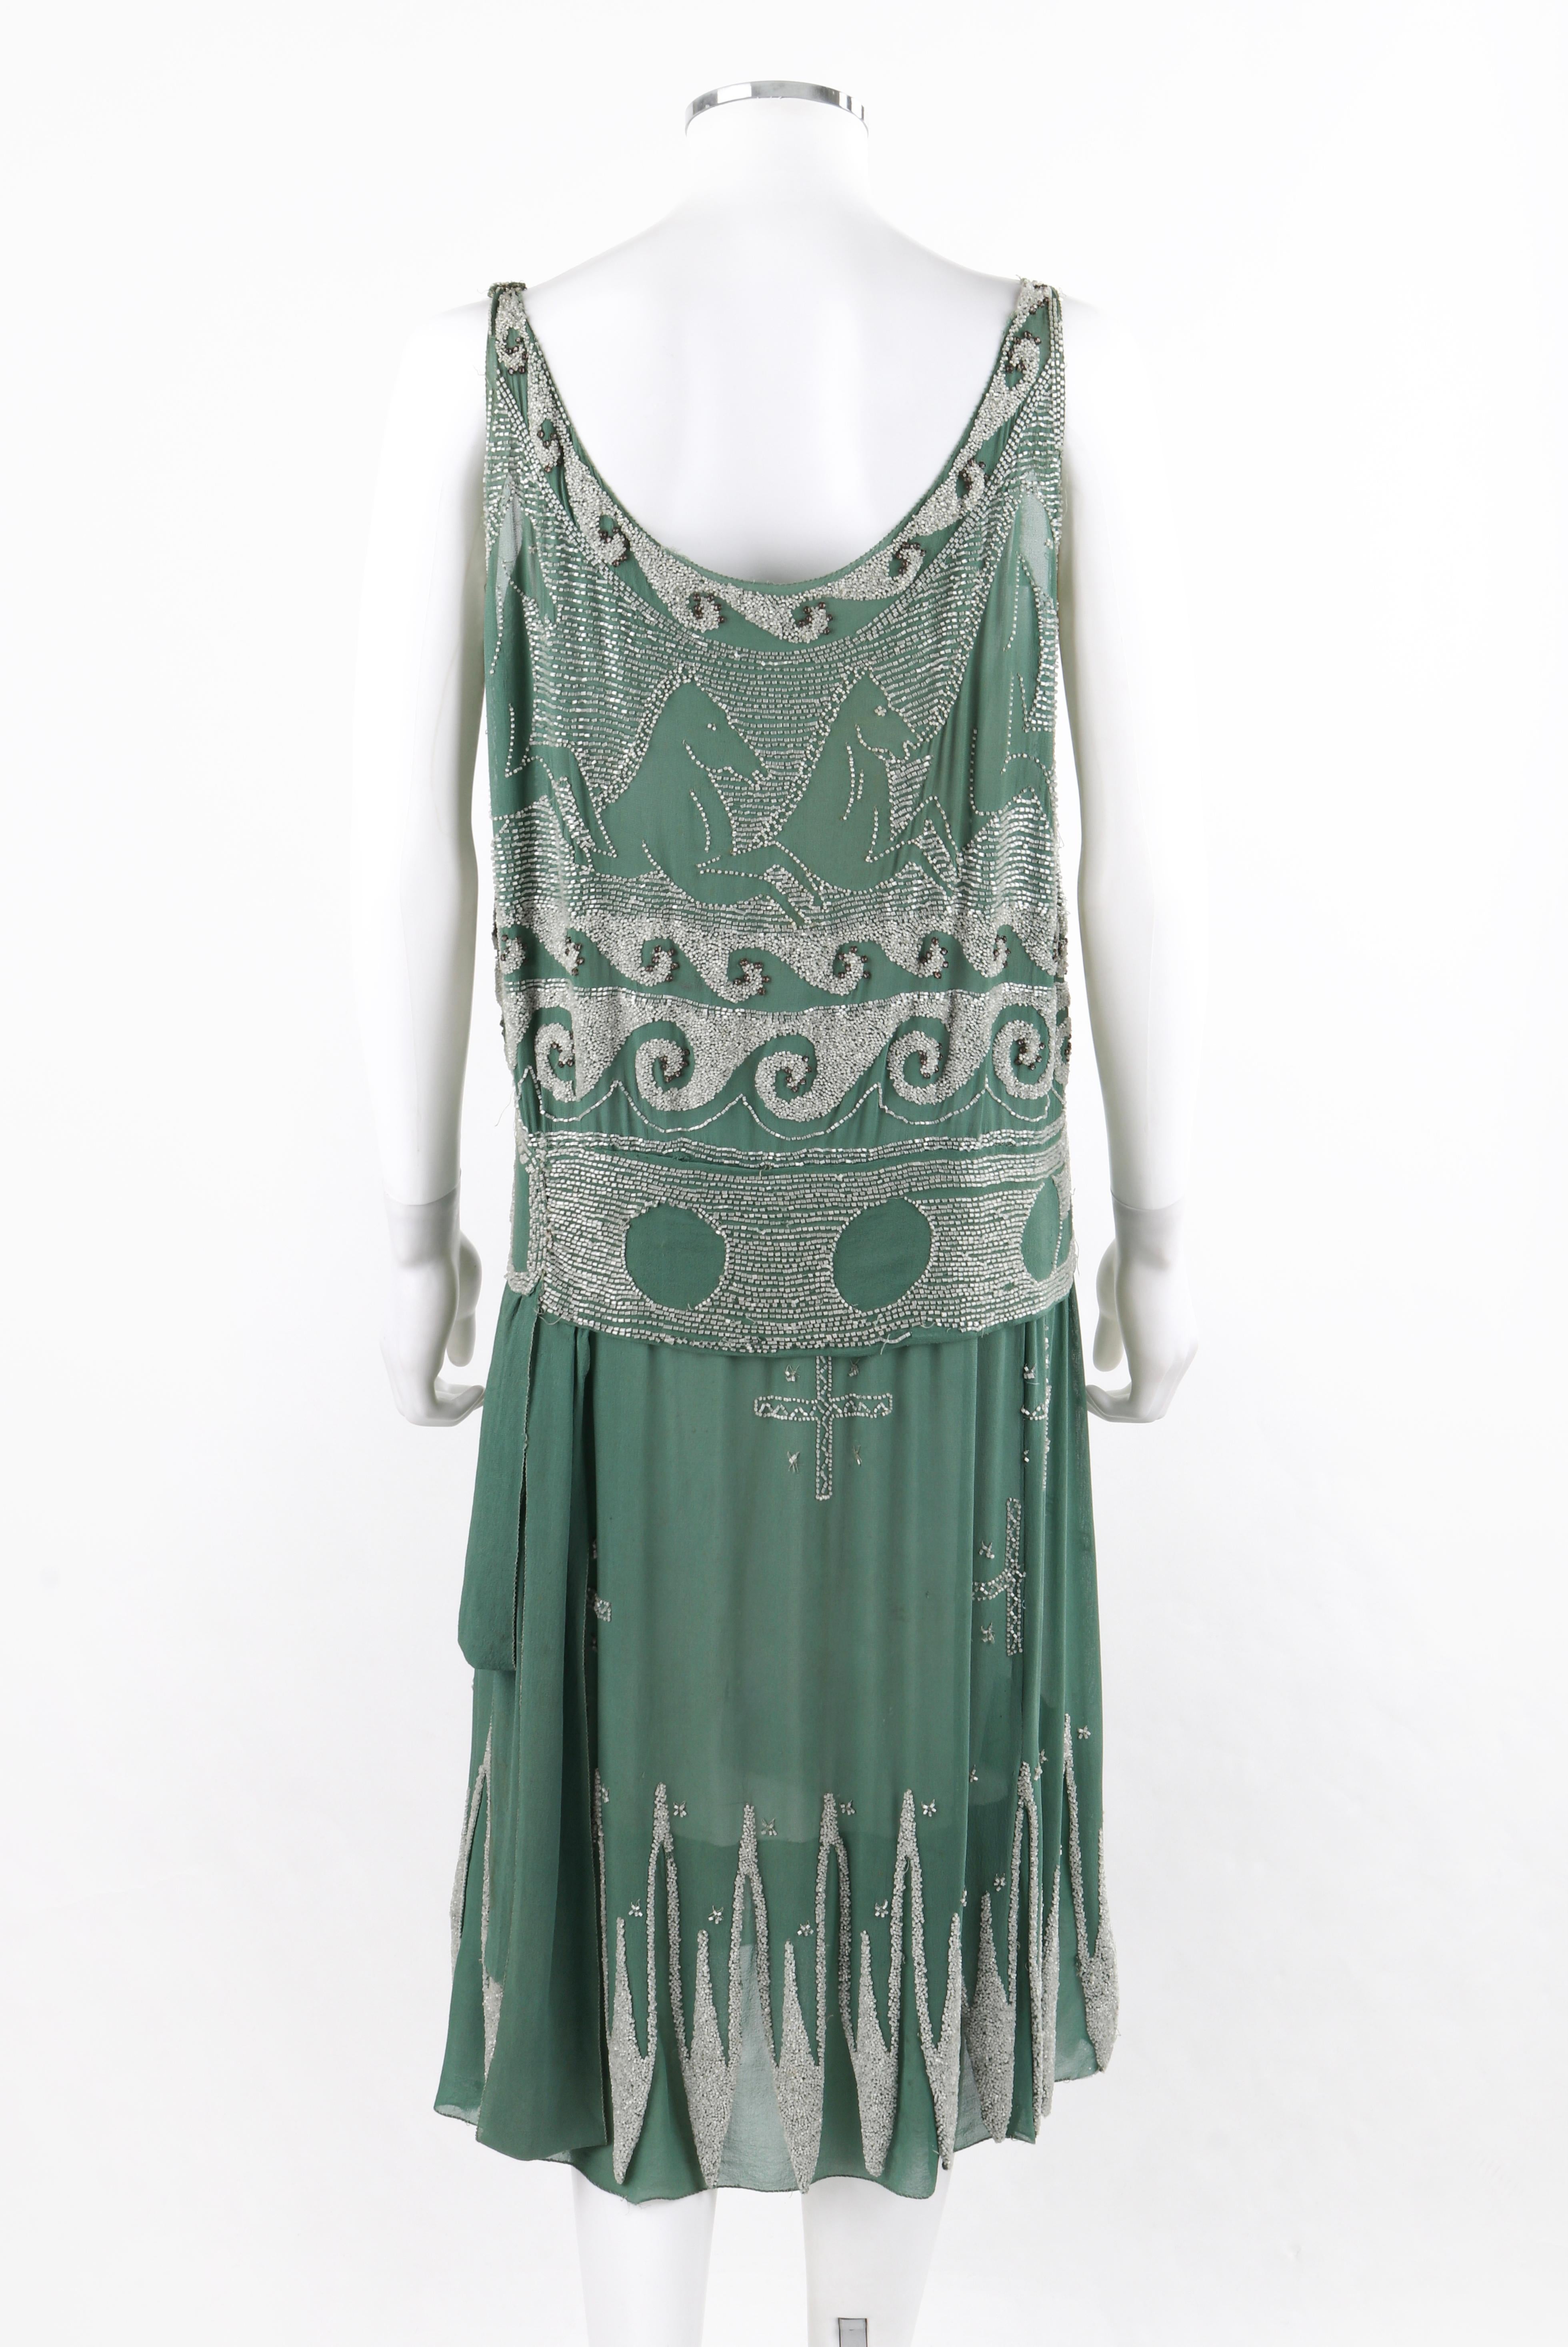 MADELEINE VIONNET c.1924 “Little Horses” Soft Green Glass Beaded Flapper Dress In Fair Condition For Sale In Thiensville, WI